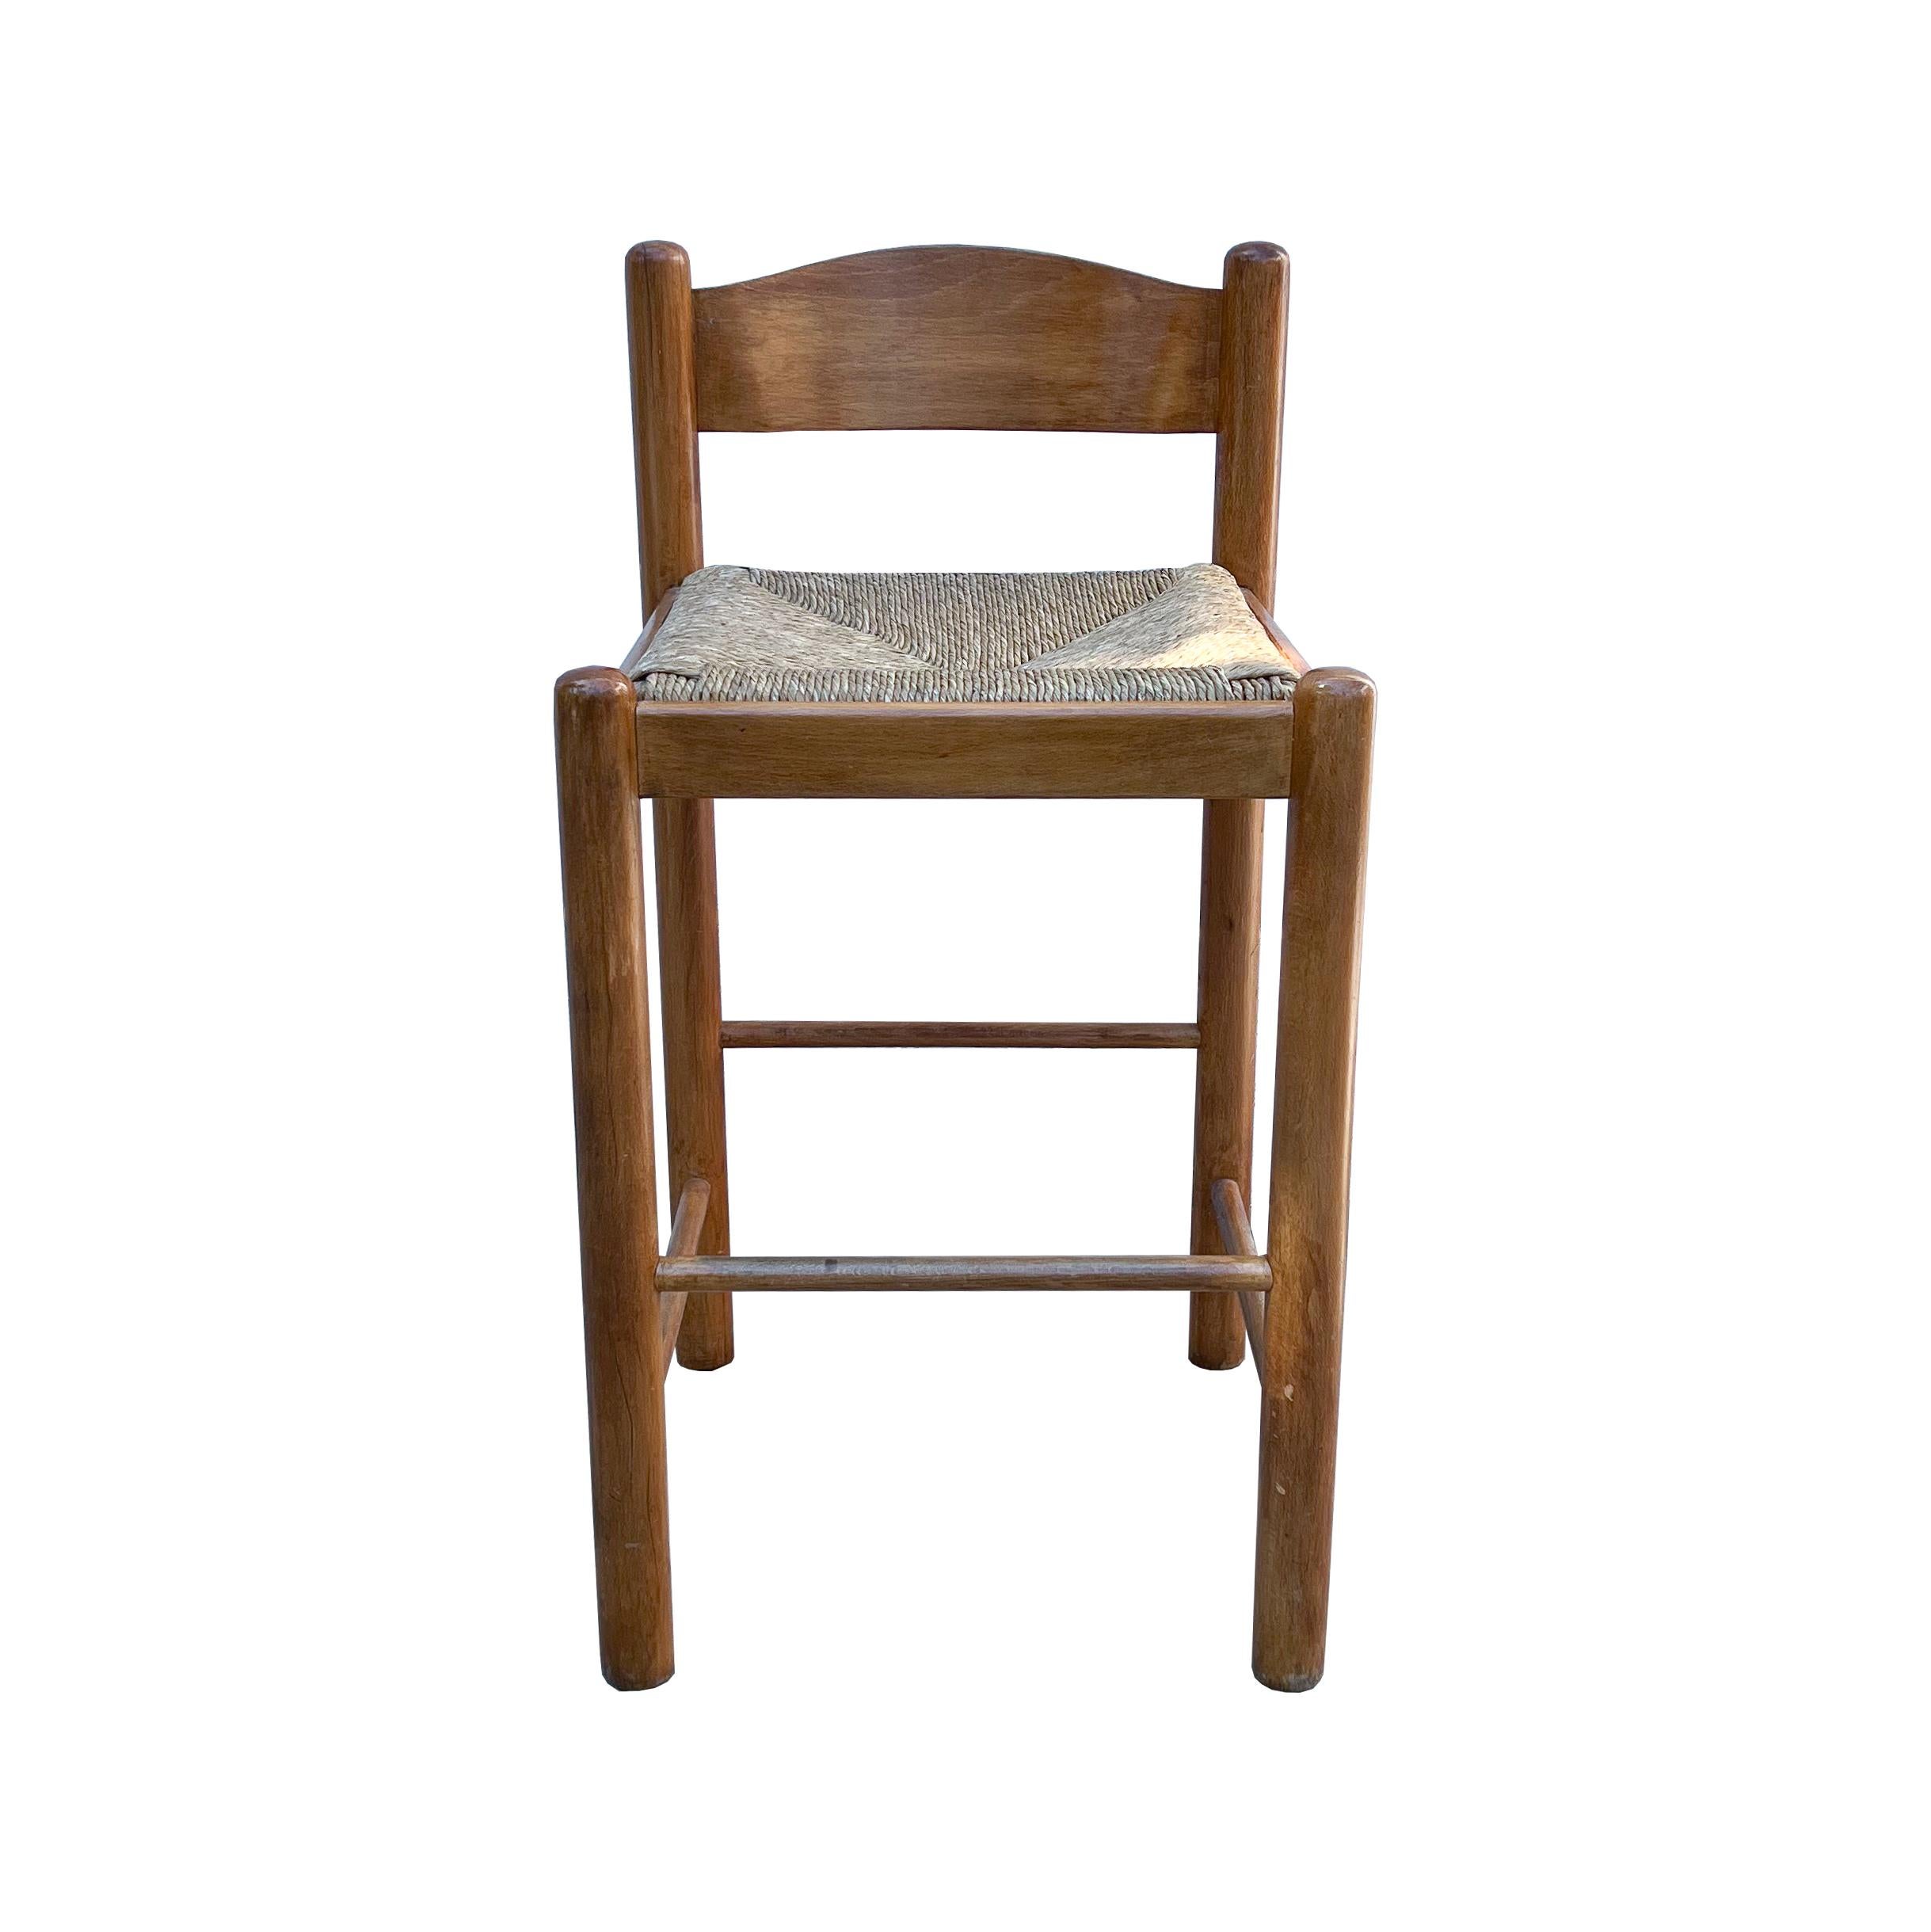 These warm wood Hank Loewenstein Padova style counter stools are simple yet elegant with rush seats. There are minor marks consistent with age, and the rush seating is in excellent condition. Strikingly comfortable and sturdy. There are three